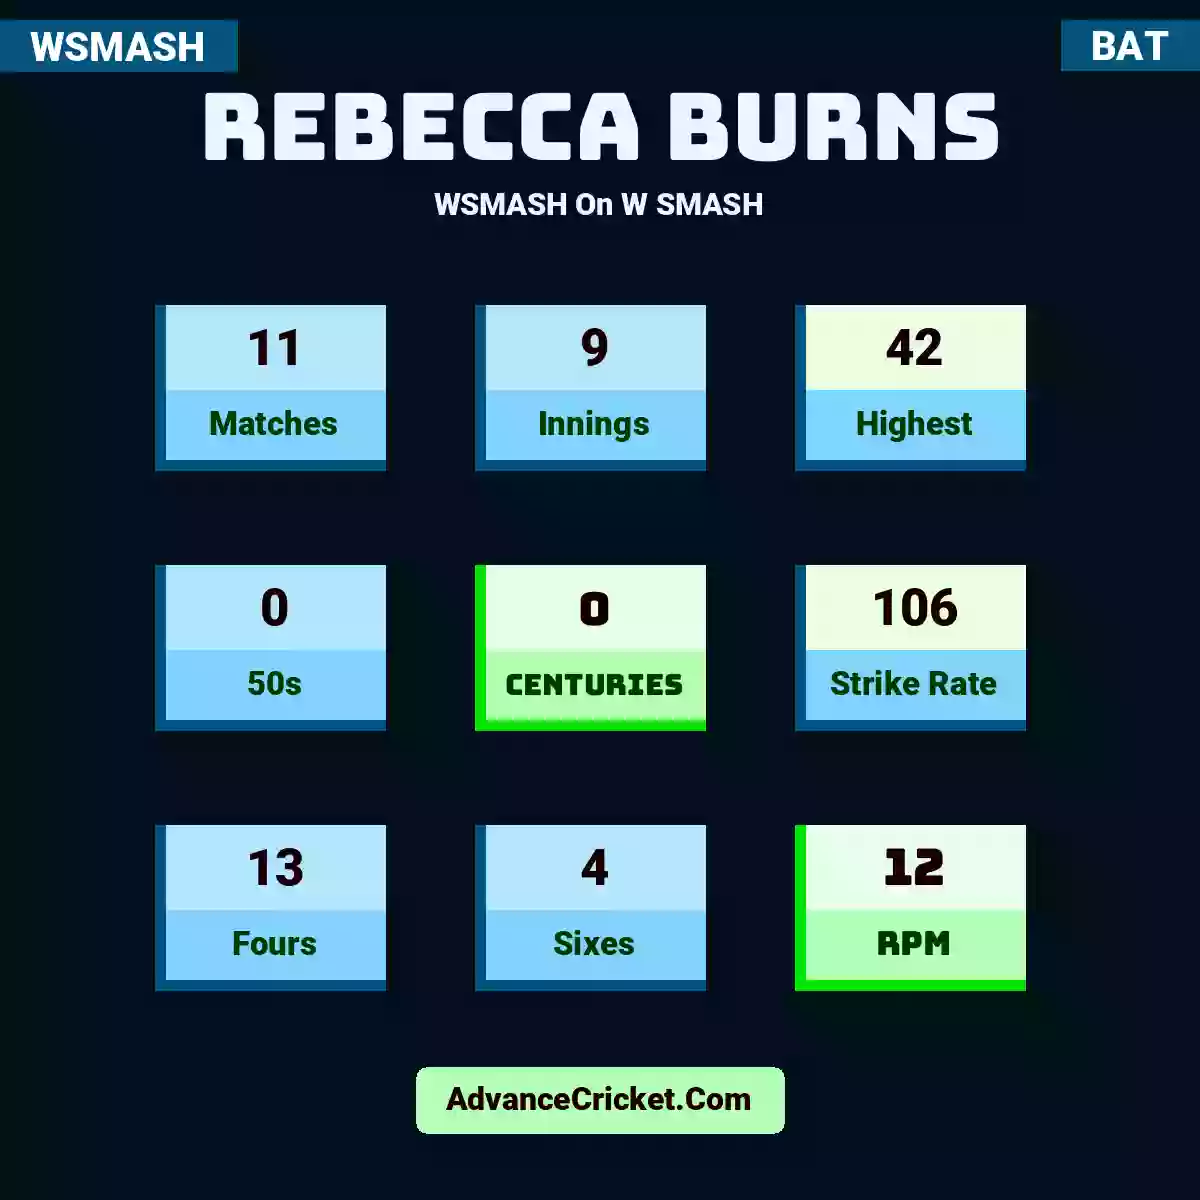 Rebecca Burns WSMASH  On W SMASH, Rebecca Burns played 11 matches, scored 42 runs as highest, 0 half-centuries, and 0 centuries, with a strike rate of 106. R.Burns hit 13 fours and 4 sixes, with an RPM of 12.